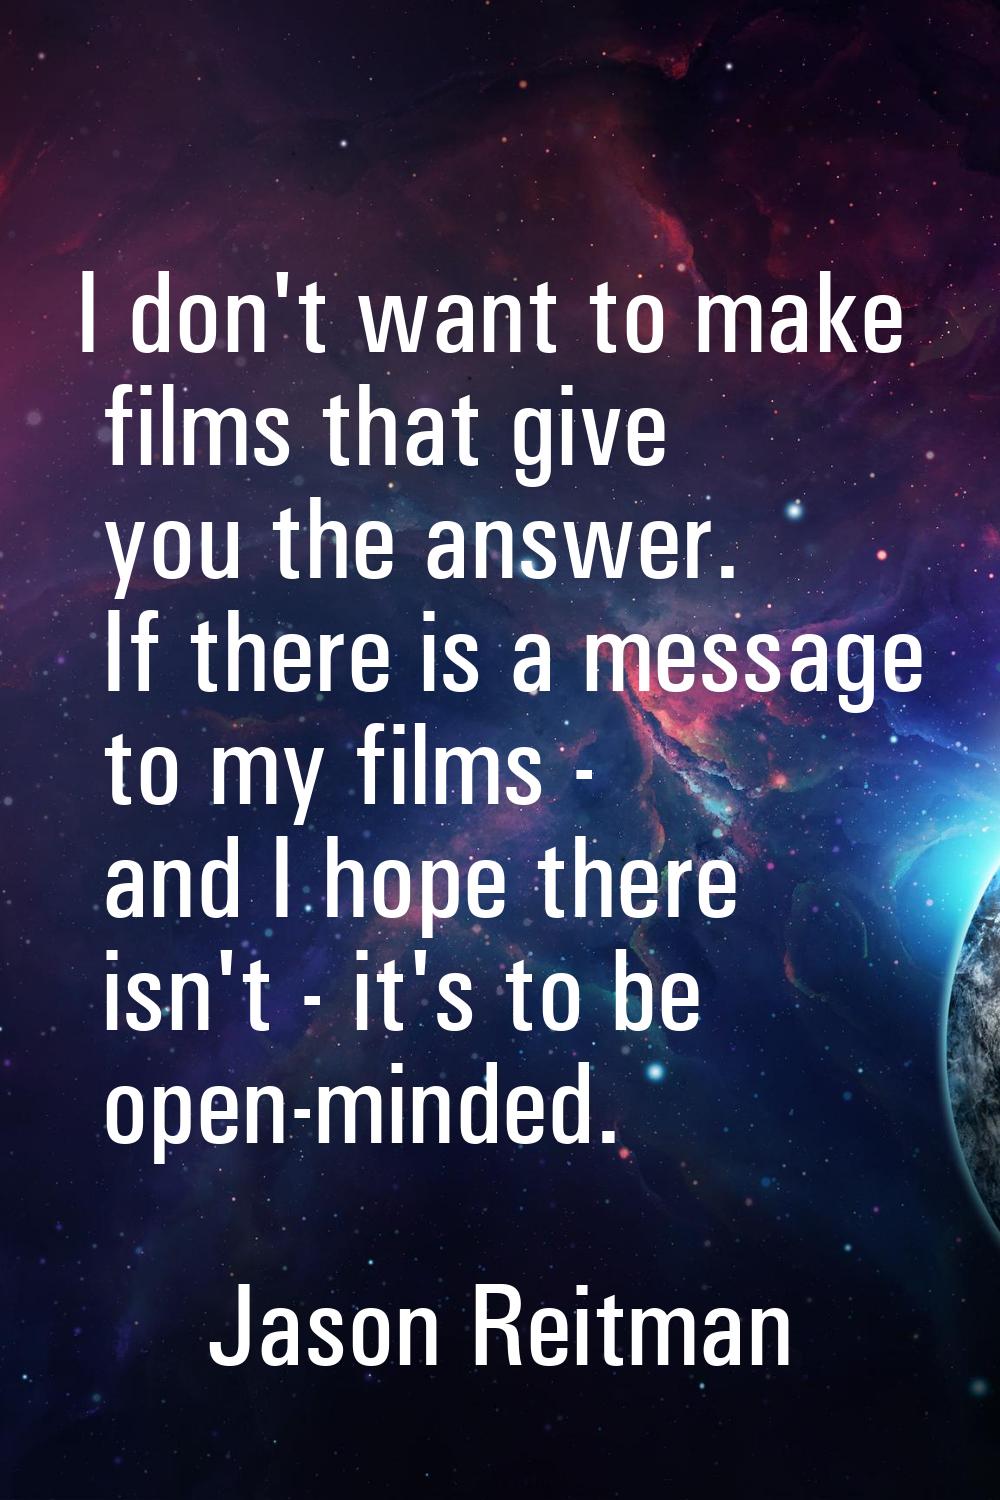 I don't want to make films that give you the answer. If there is a message to my films - and I hope